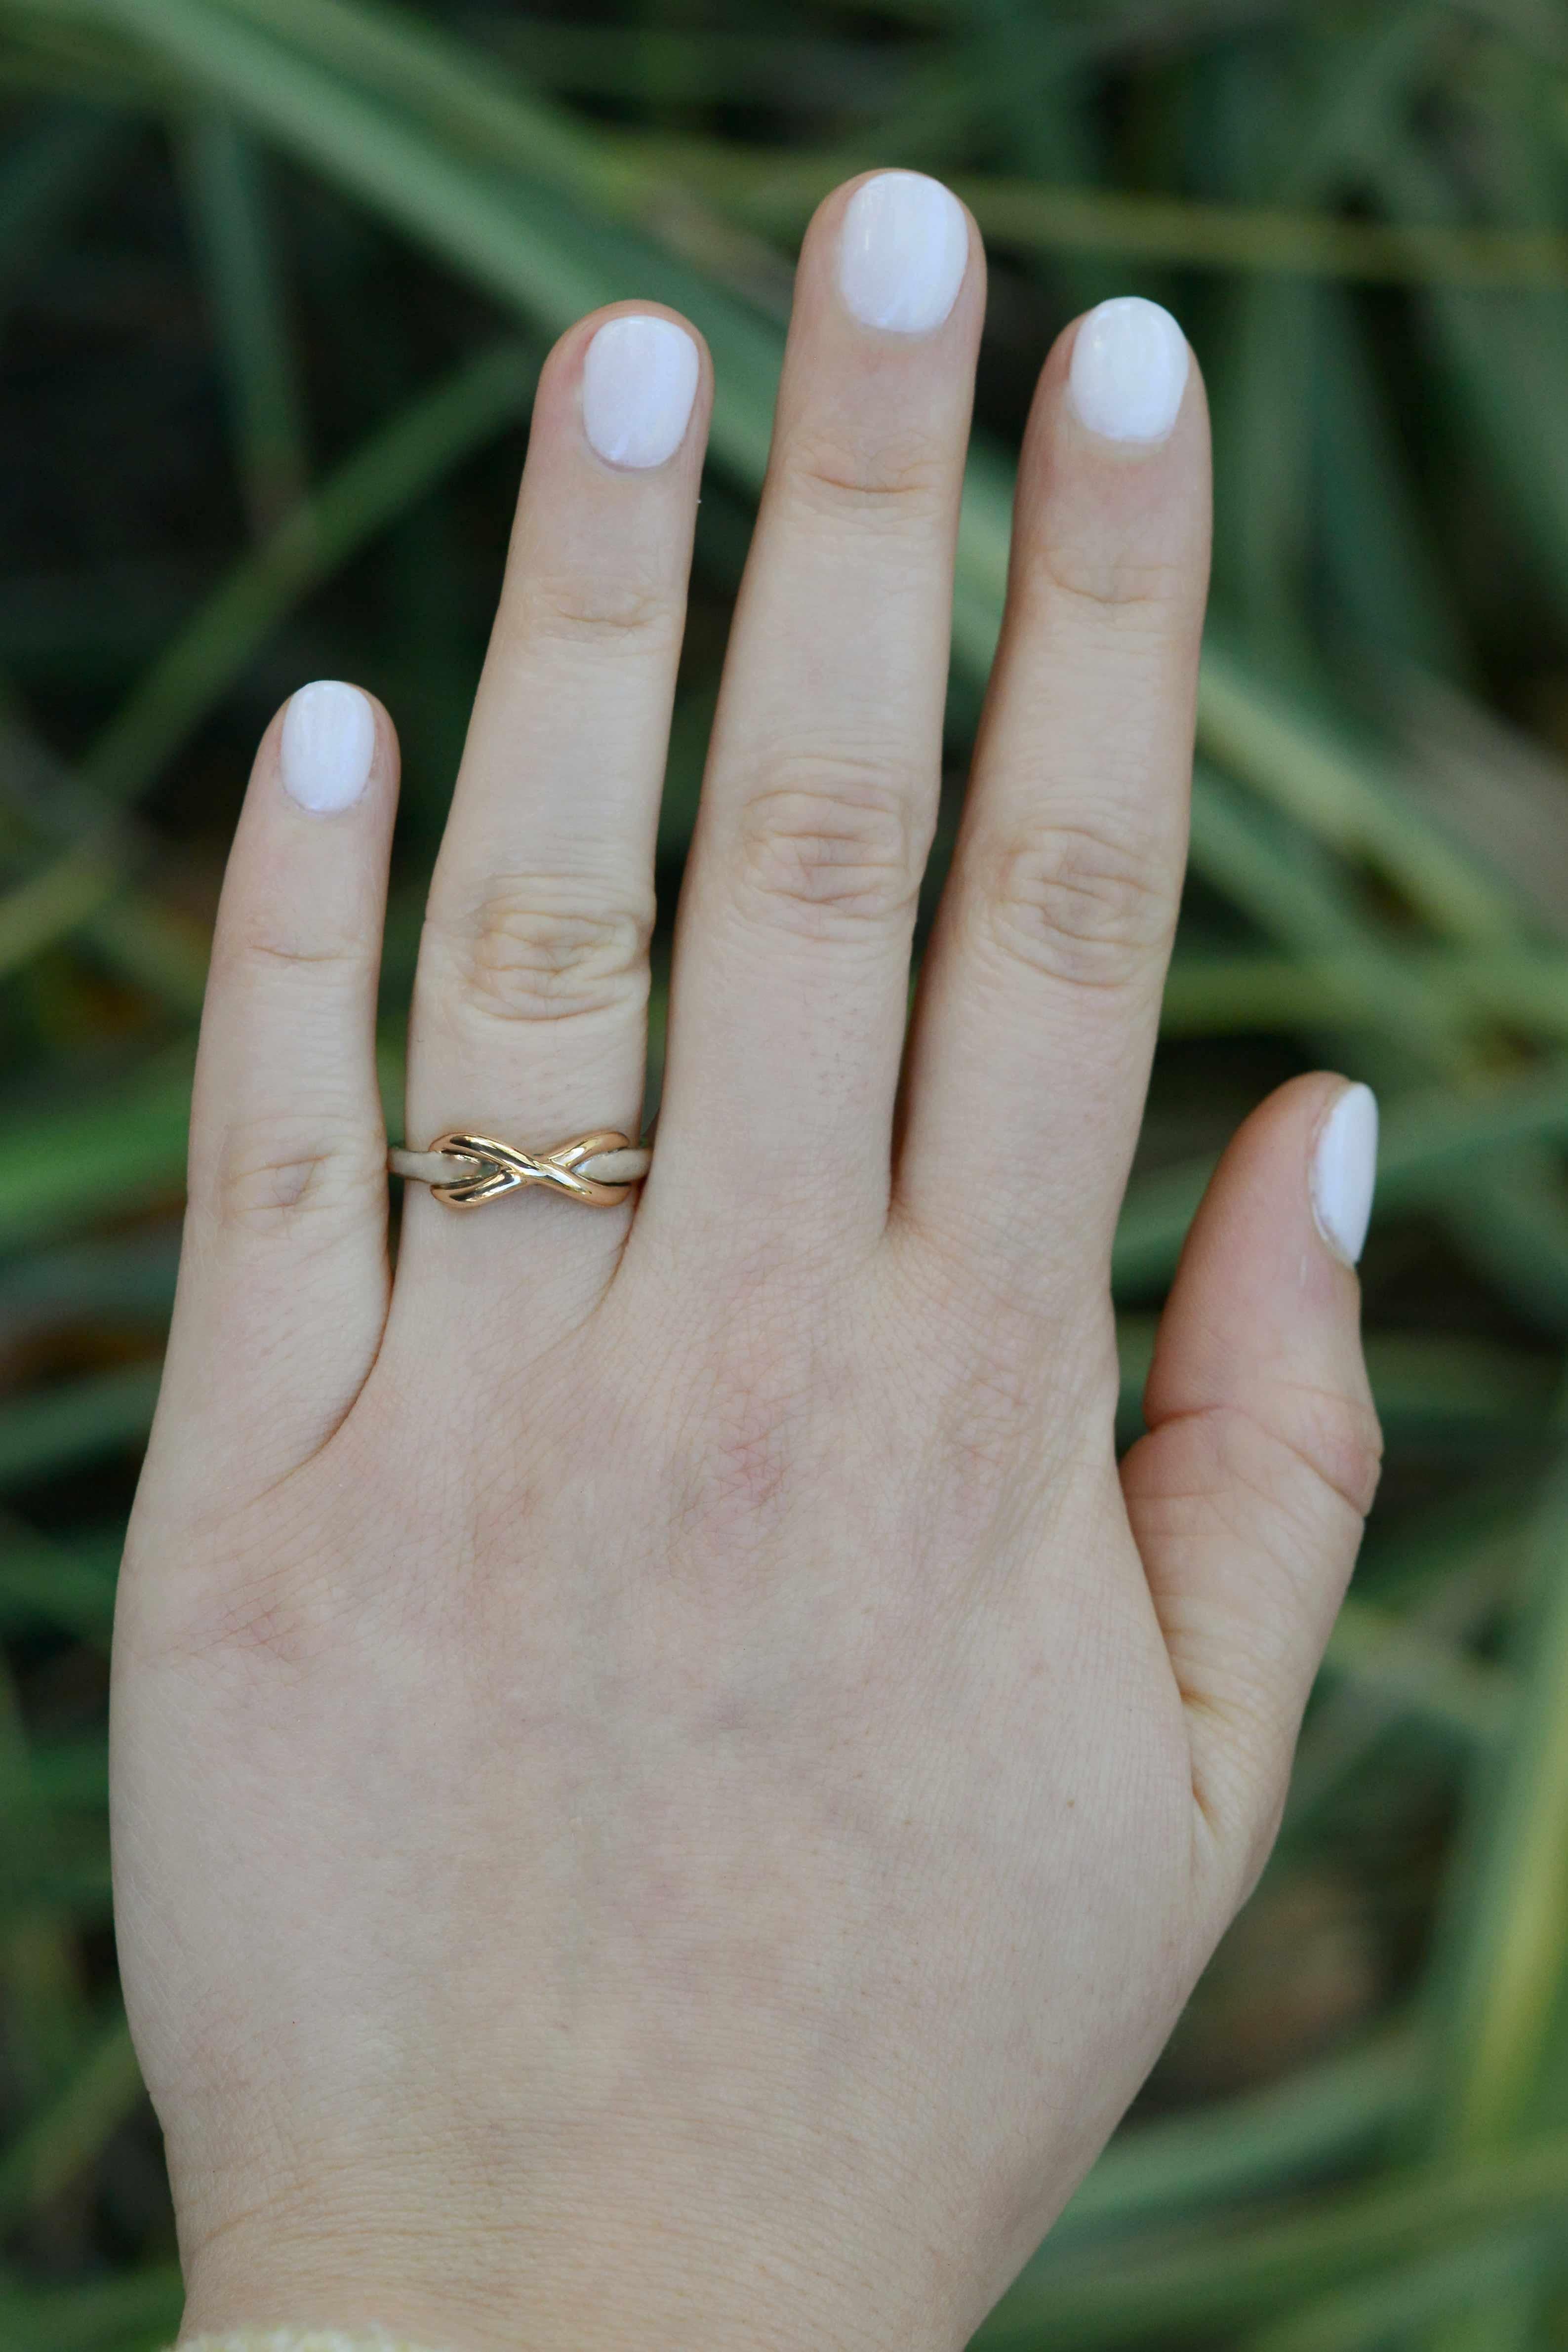 This Tiffany & Co. infinity band is a lovable little piece. This wedding band features a sterling silver band with a contrasting, intertwined 18k rose gold infinity woven through it. You can never go wrong with Tiffany! This retired design is no